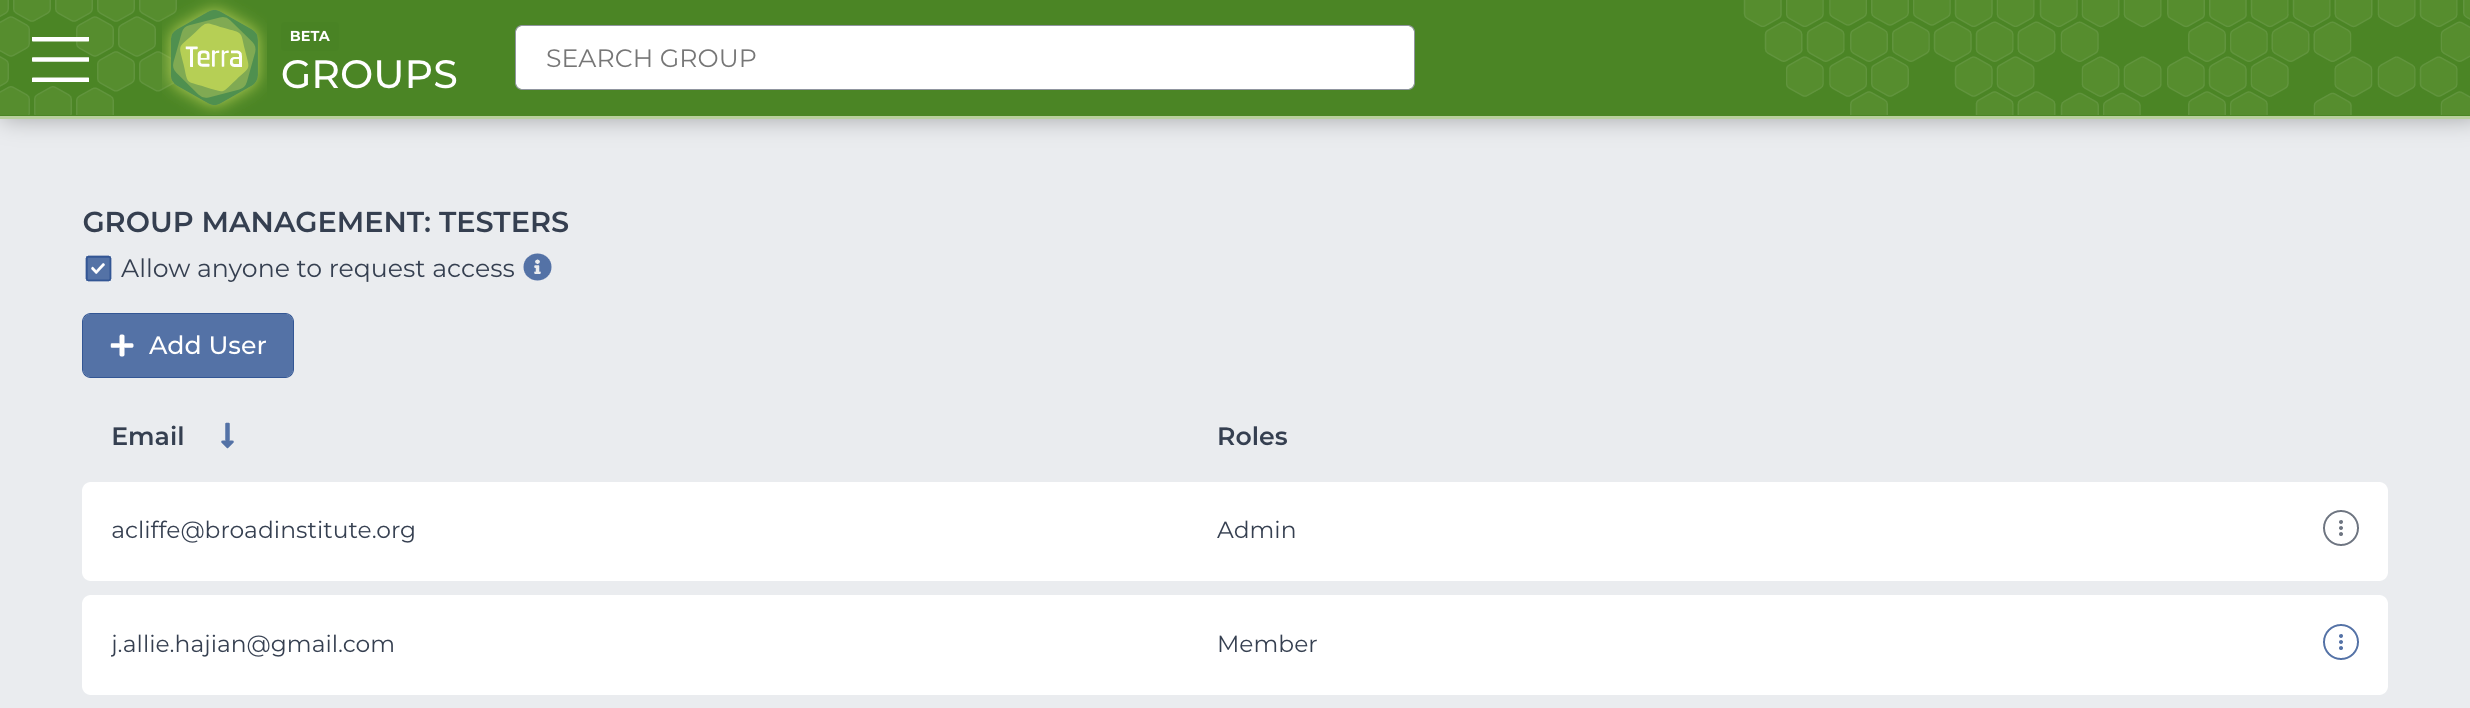 Screenshot of Group Management page